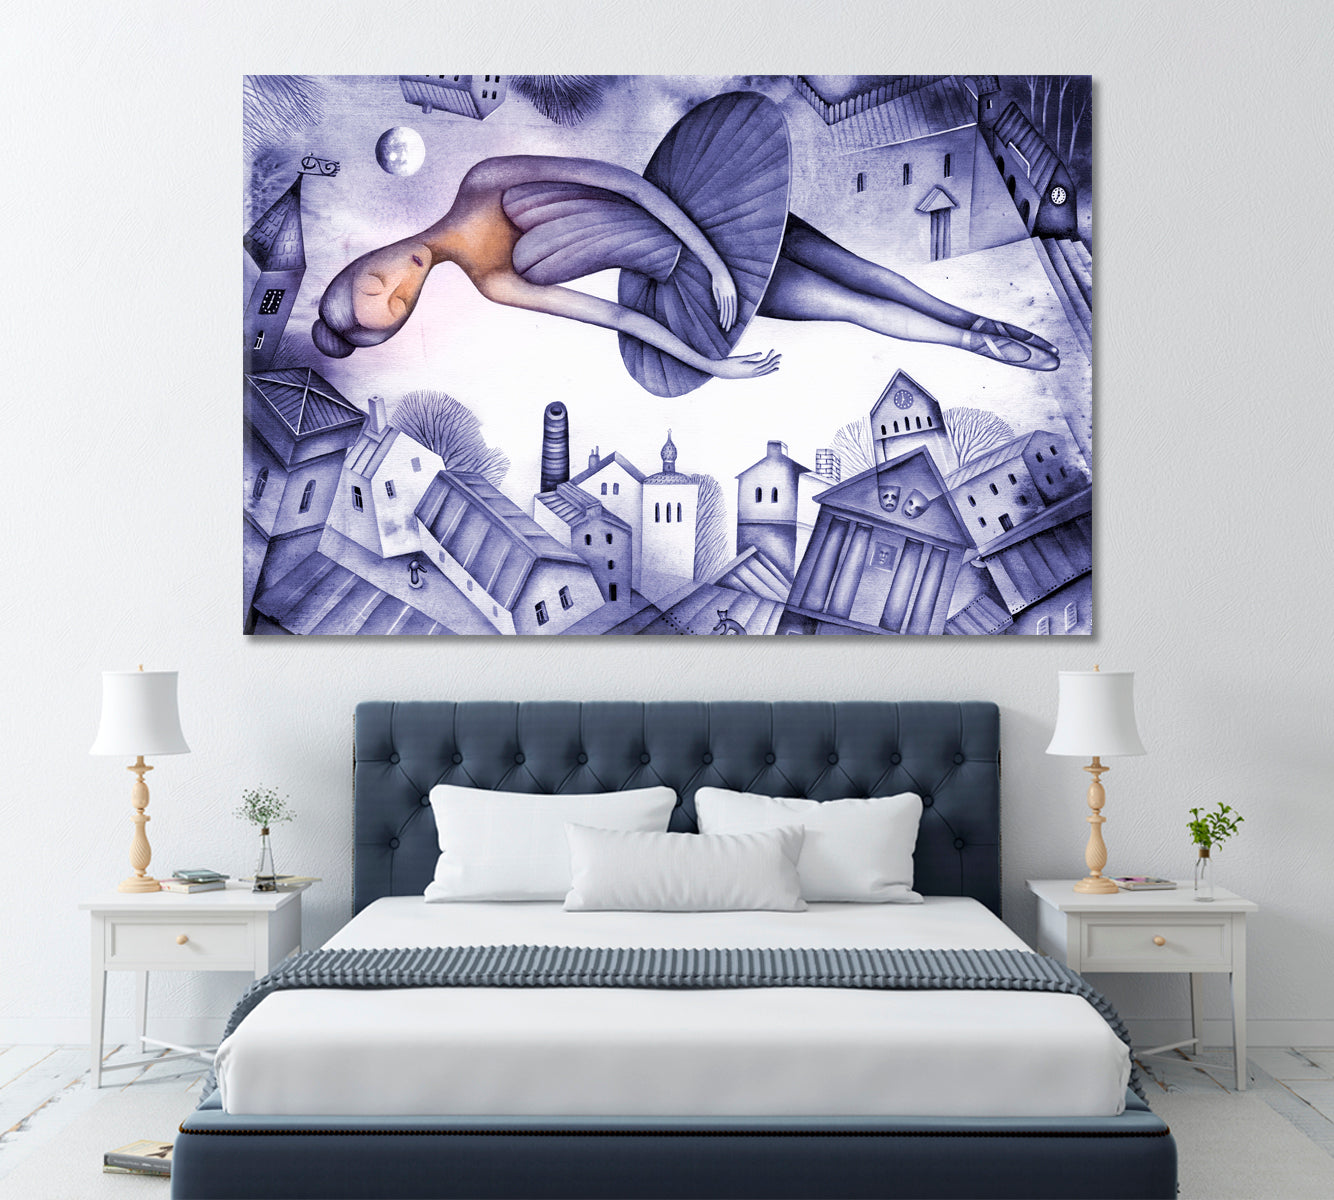 Ballerina over City in Cubism Style Canvas Print ArtLexy 1 Panel 24"x16" inches 